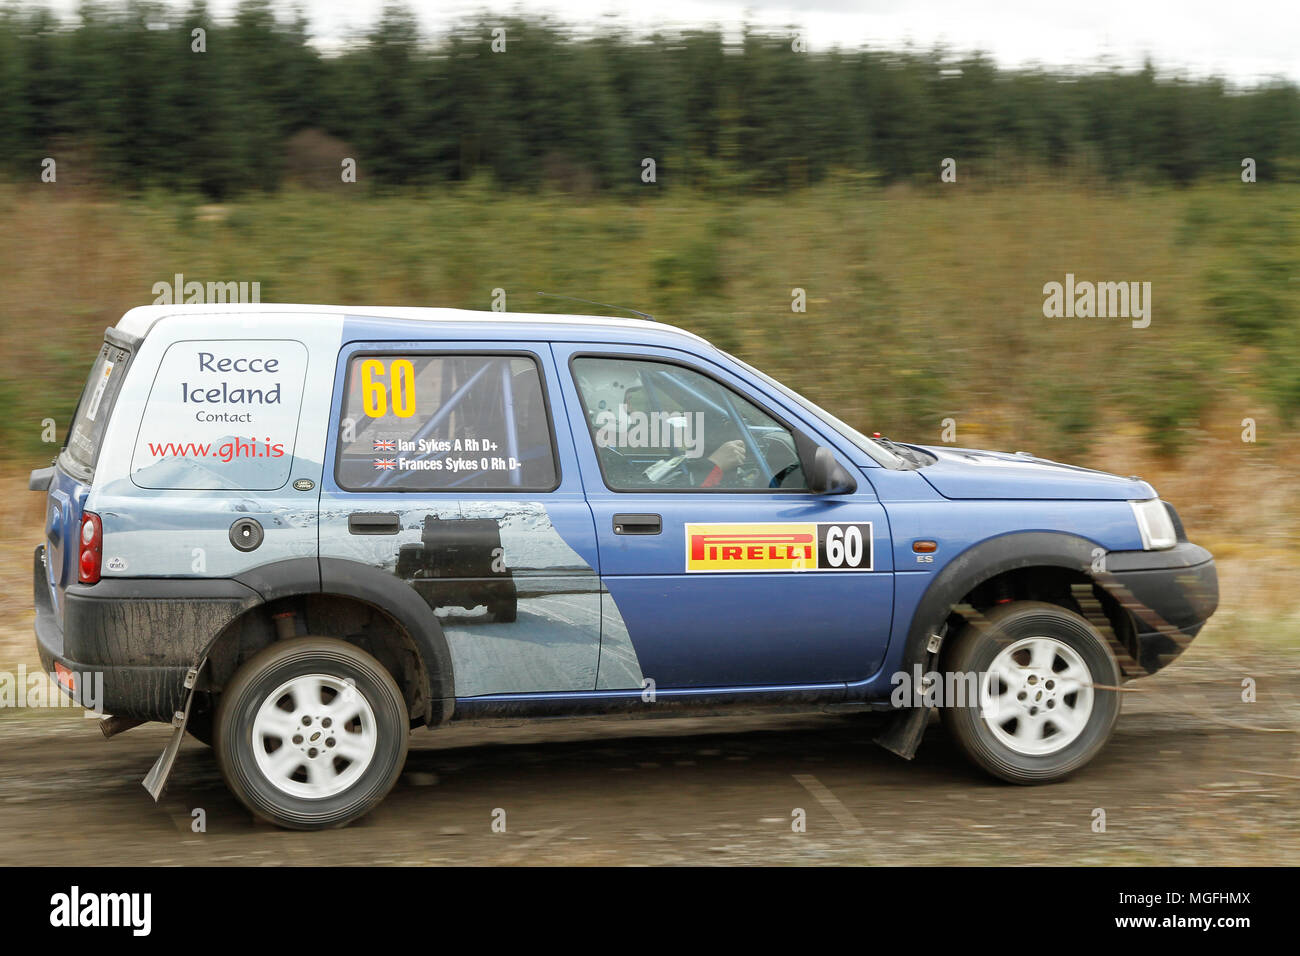 Kielder Forest, Northumberland, UK, 28 April 2018. Rally drivers compete in the Pirelli International Rally and second round of the Prestone British Rally Championship. (Special Stage 1 - Pundershaw 1). Andrew Cheal/Alamy Live News Stock Photo